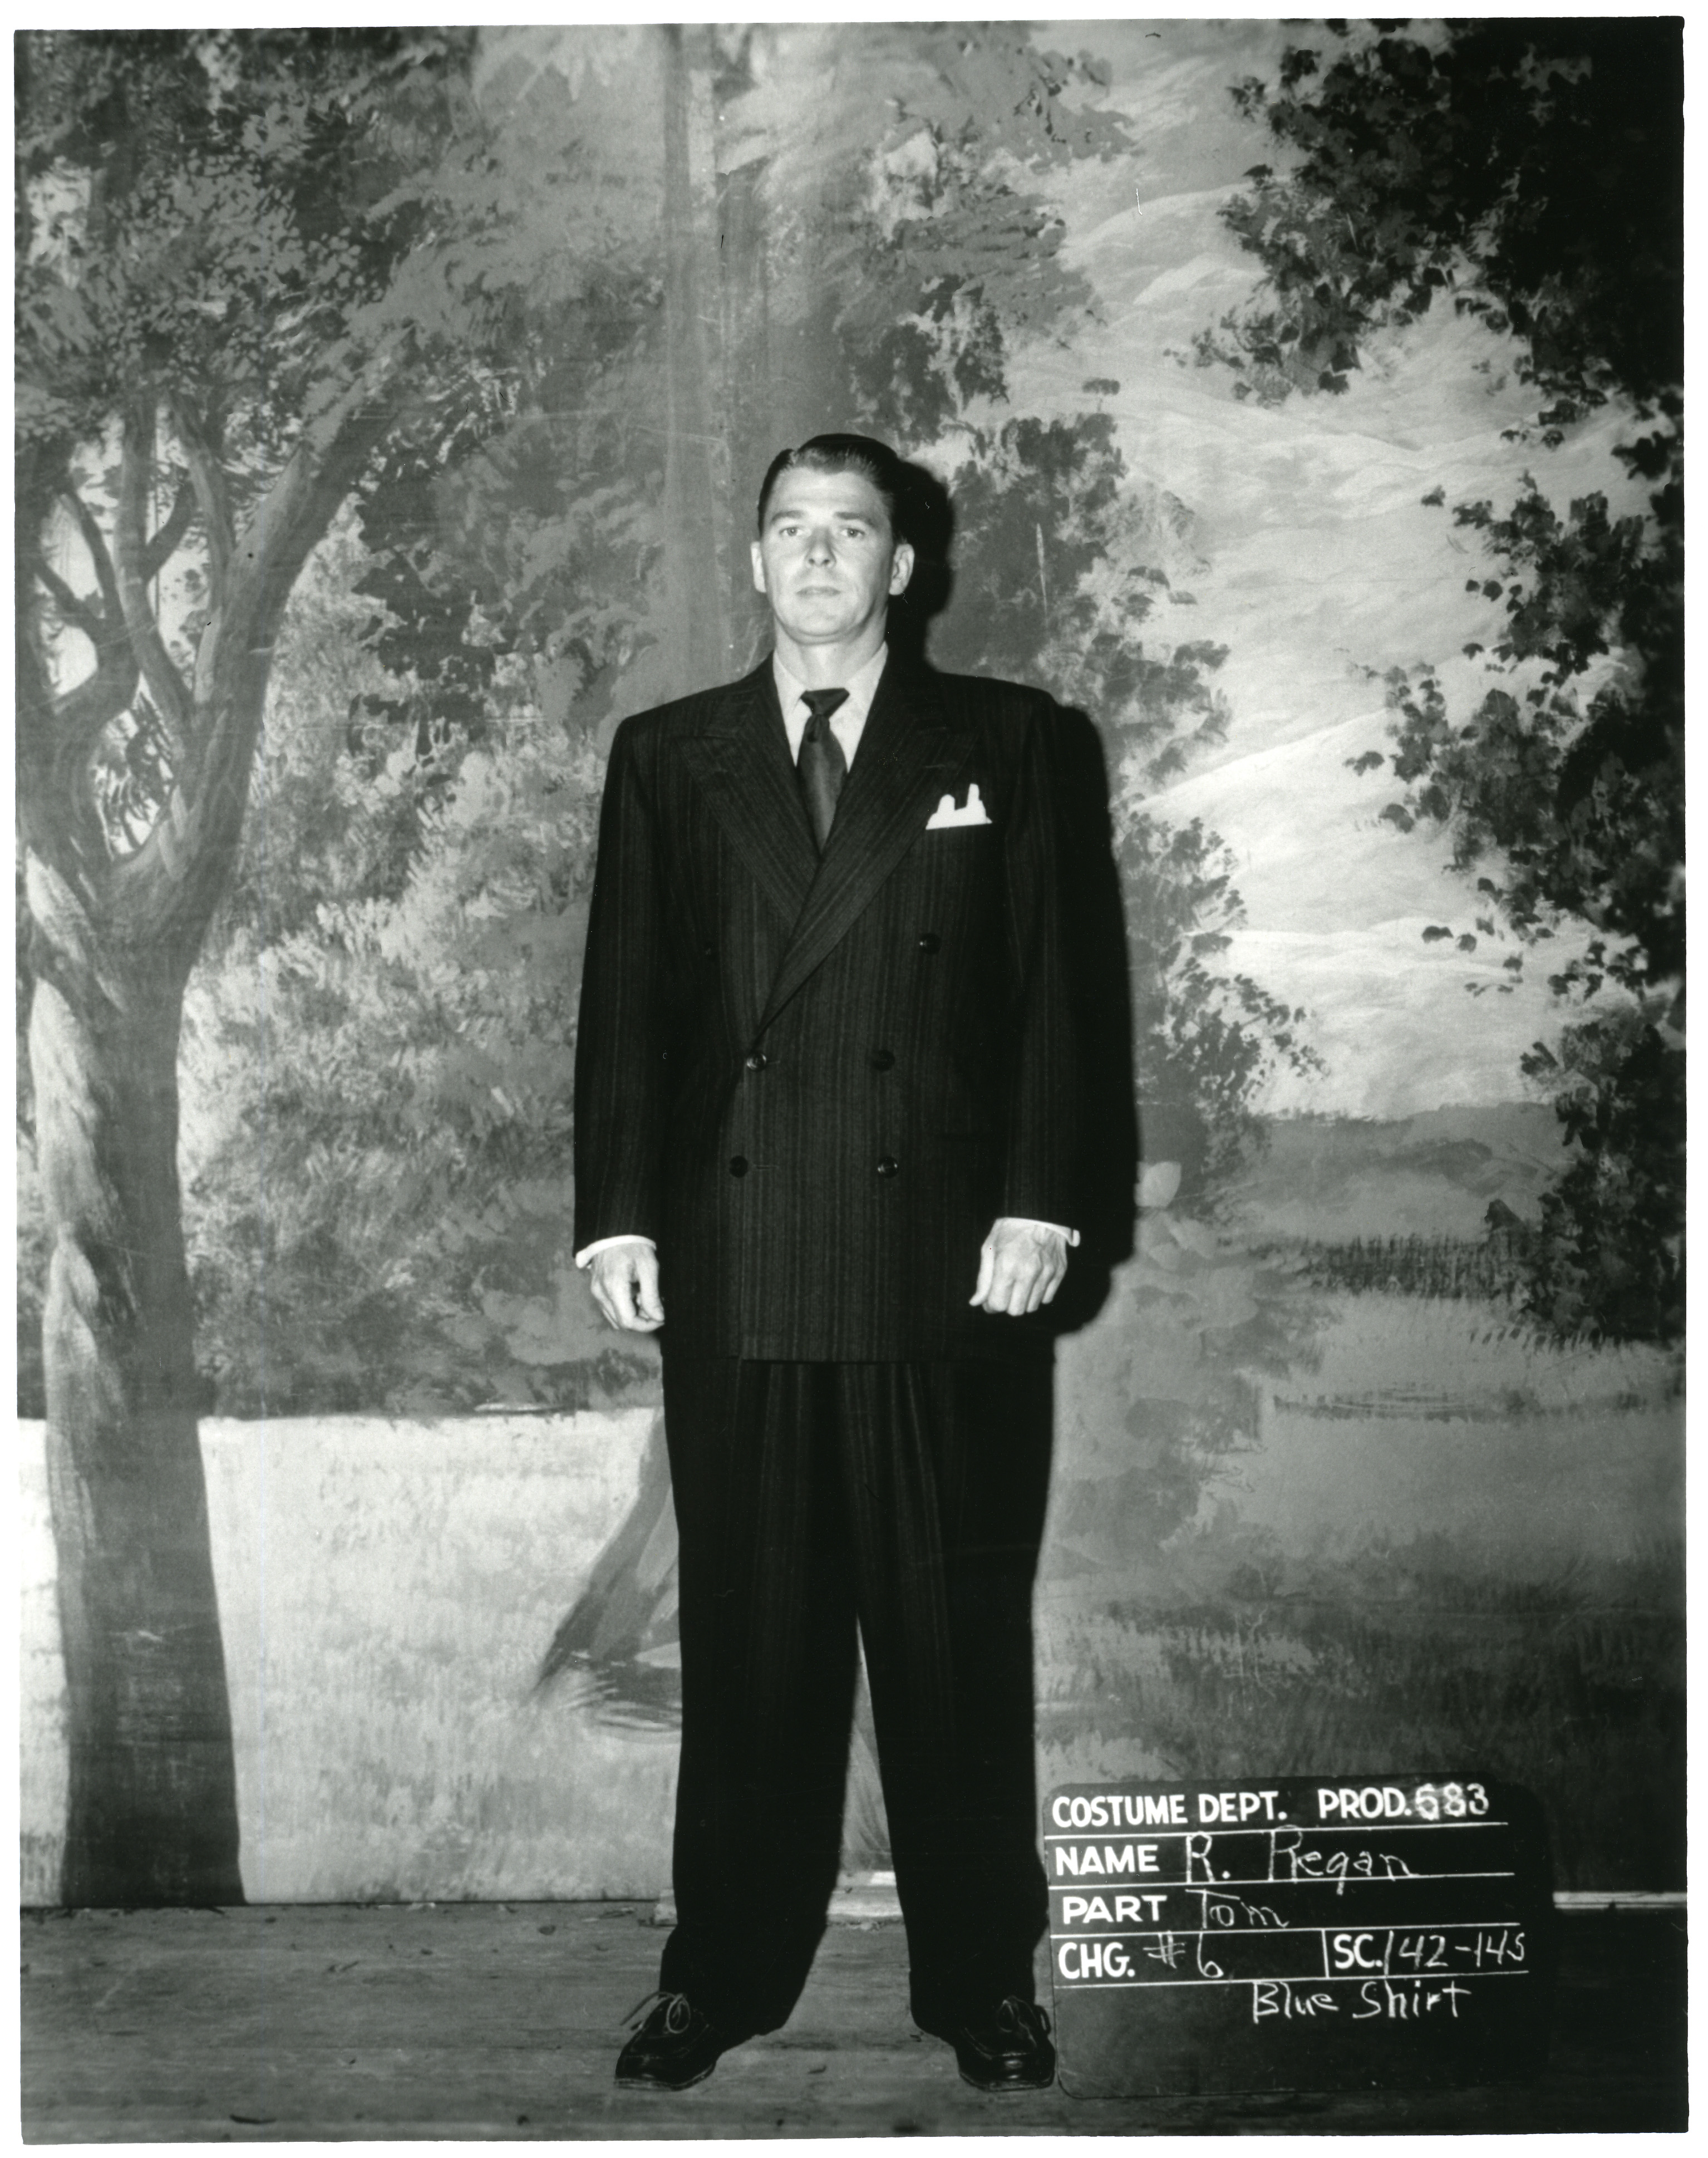 Ronald Reagan in suit from movie costume fitting (full length)